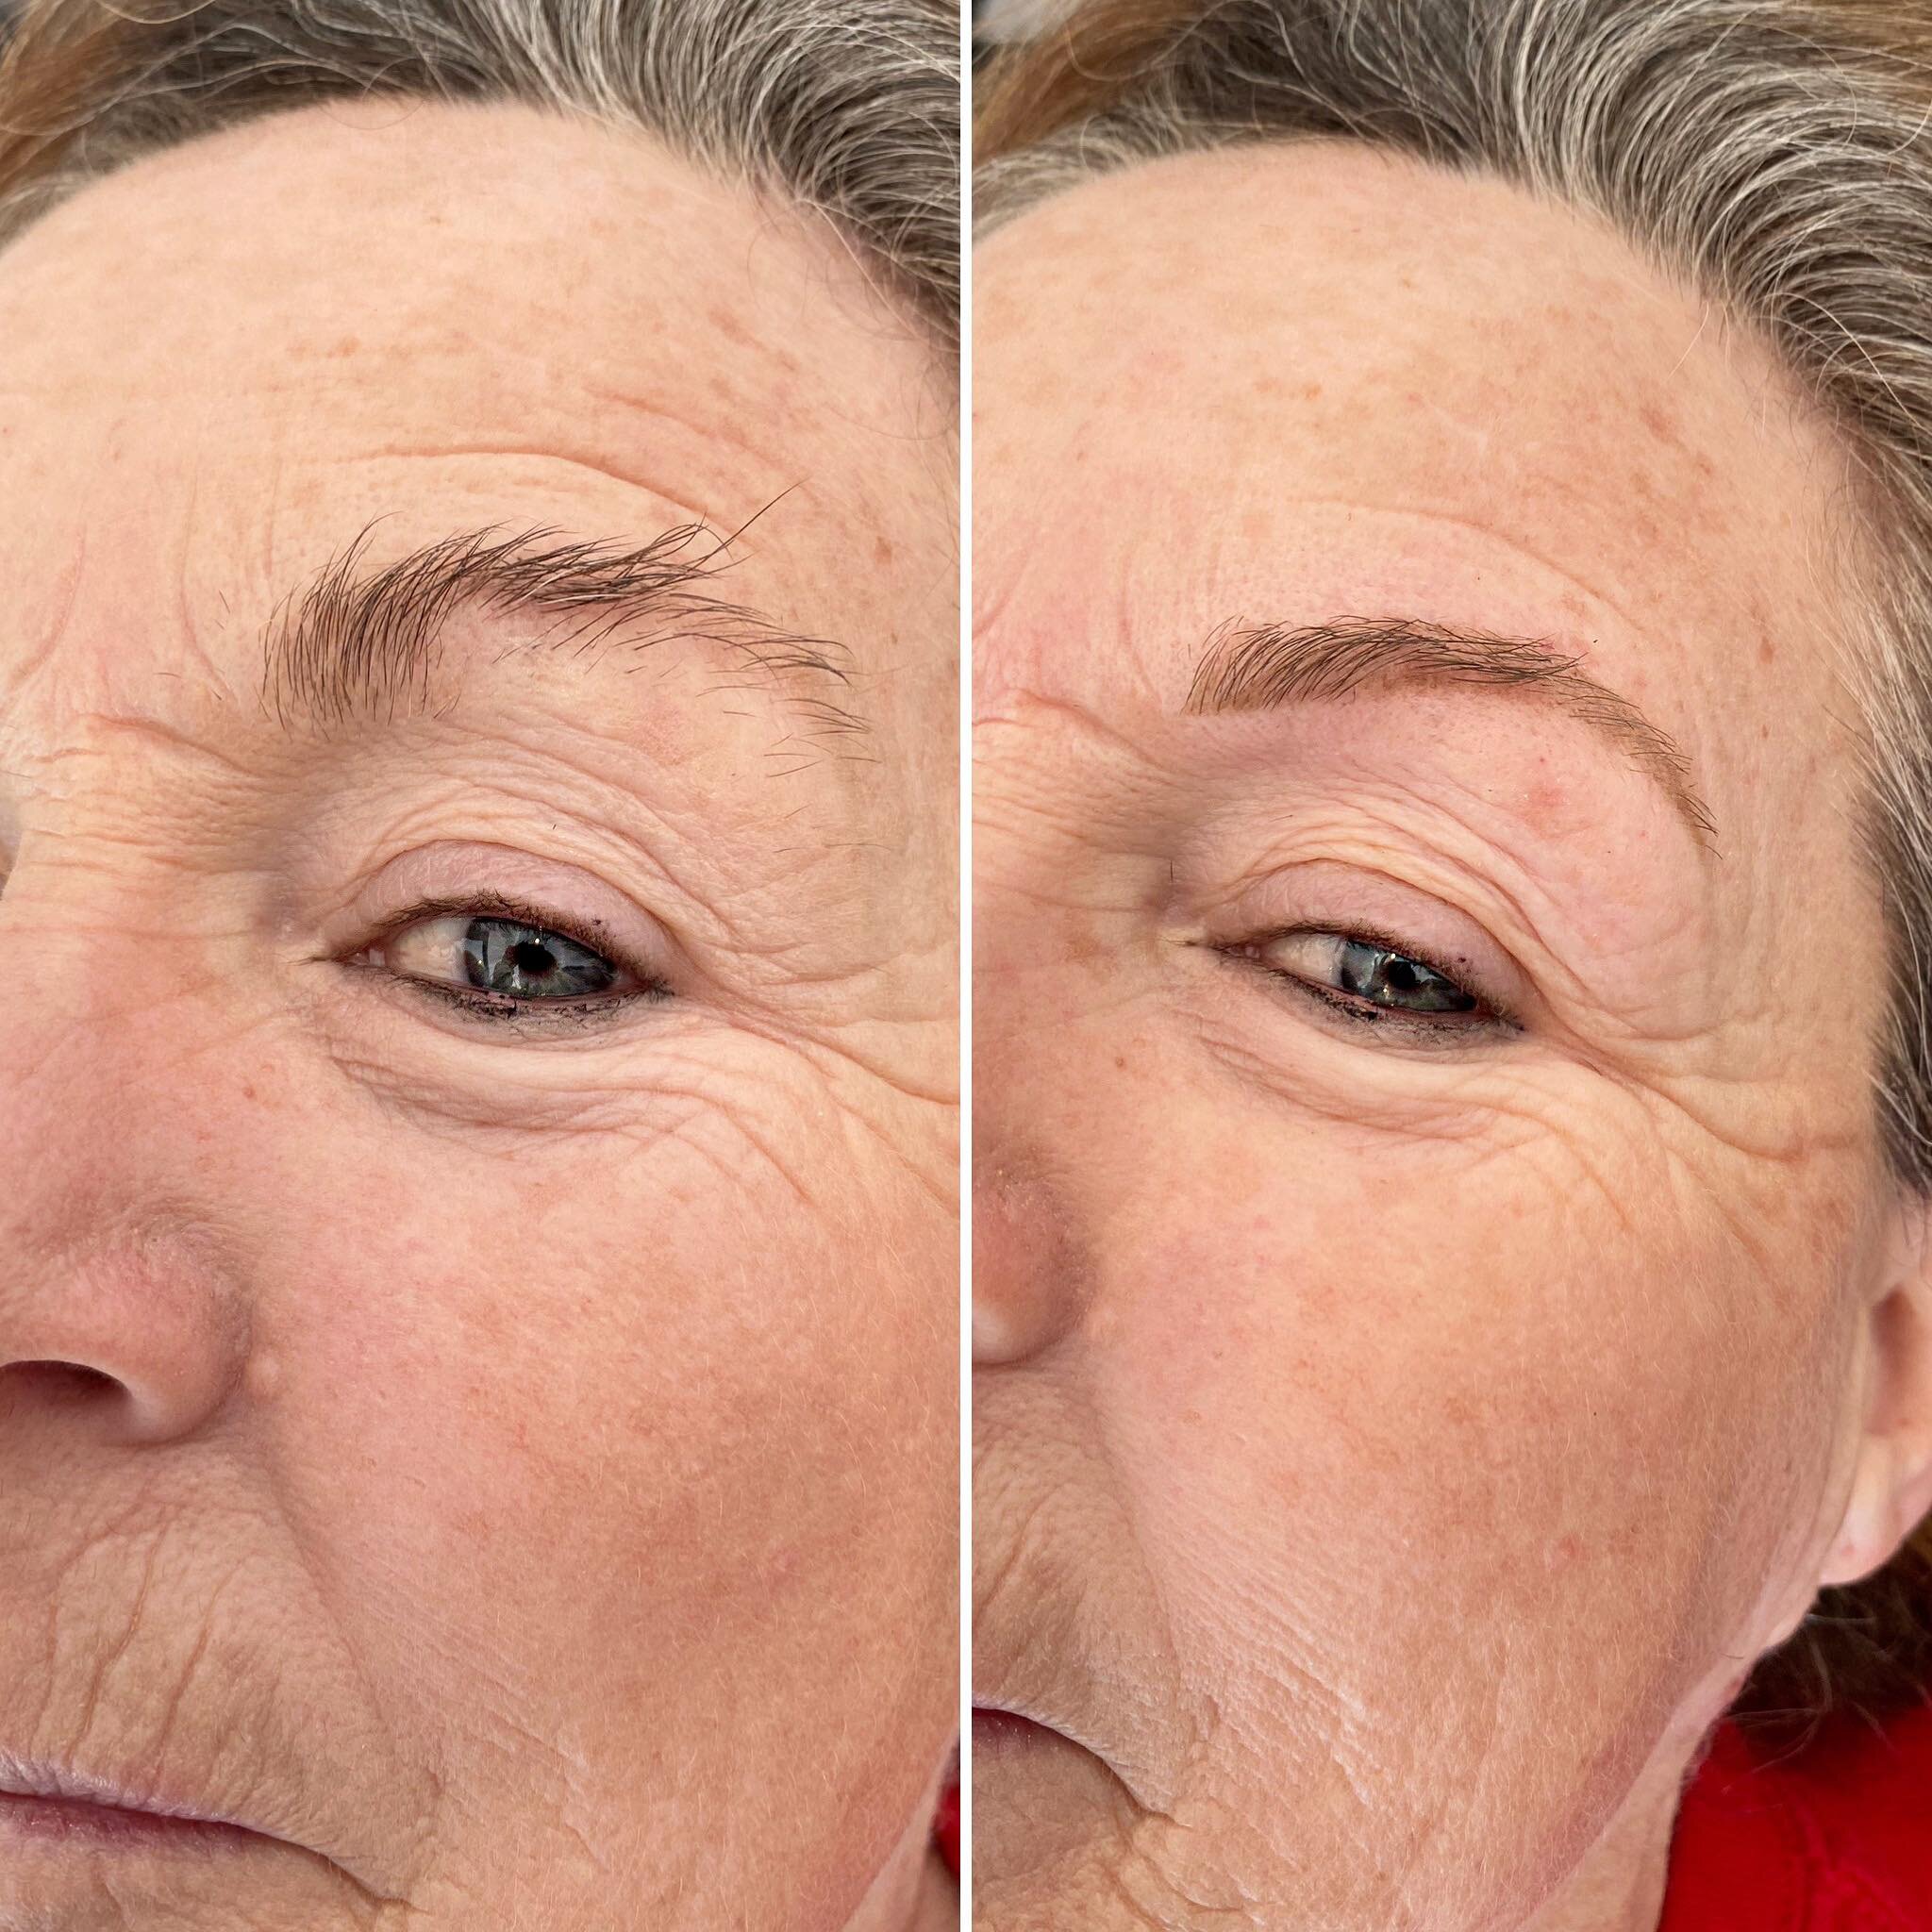 Can you believe this was a 15 minute transformation for only $15!😱✨

Book an eyebrow threading &amp; shaping appointment with any of our brow experts and in less than 15 minutes you can have amazing brows too! 

Benefits of Eyebrow Threading &amp; S